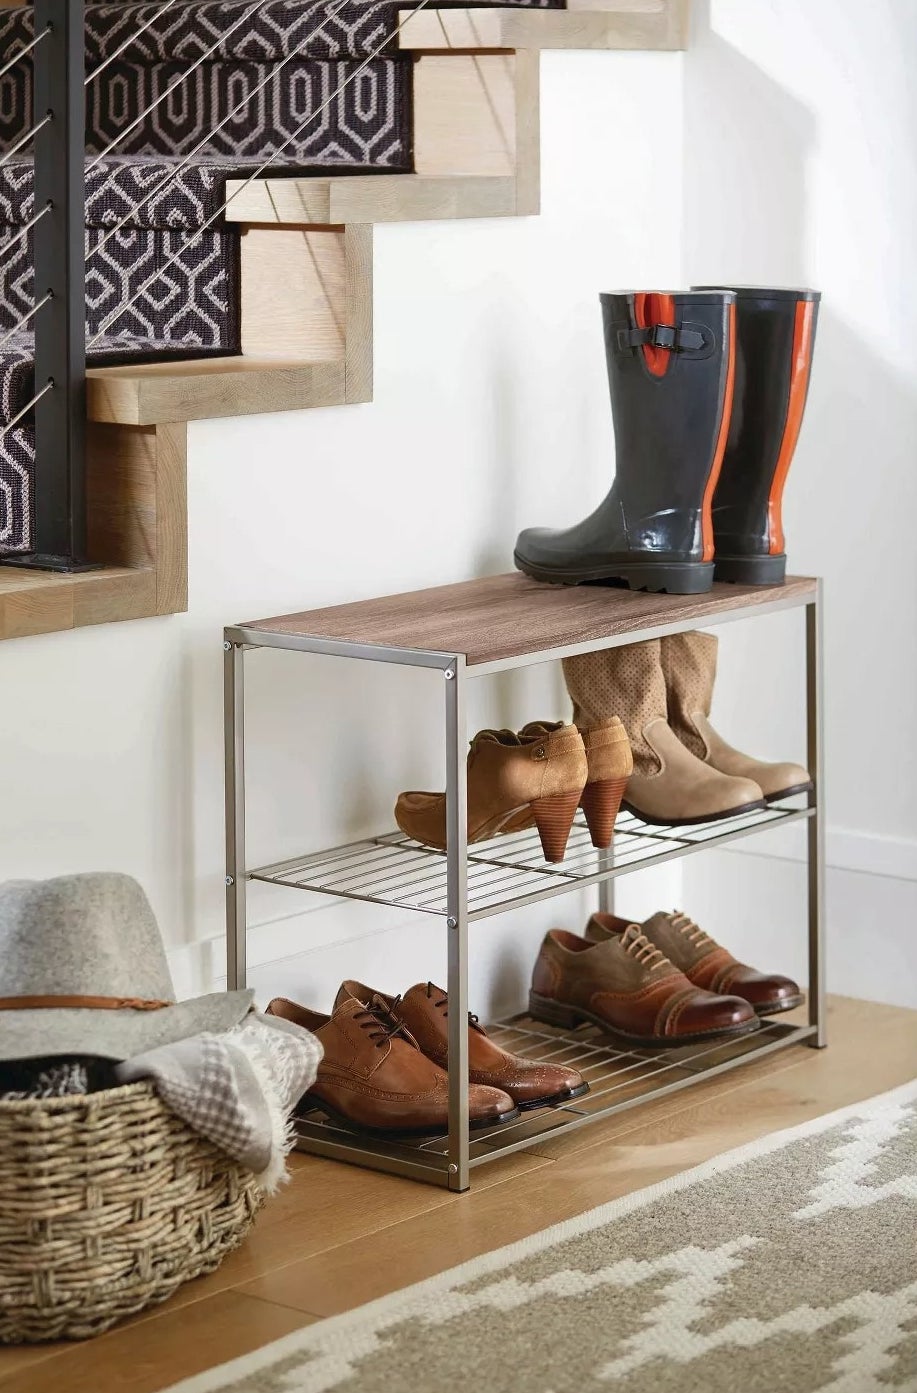 The shoe rack with three tiers in an entryway